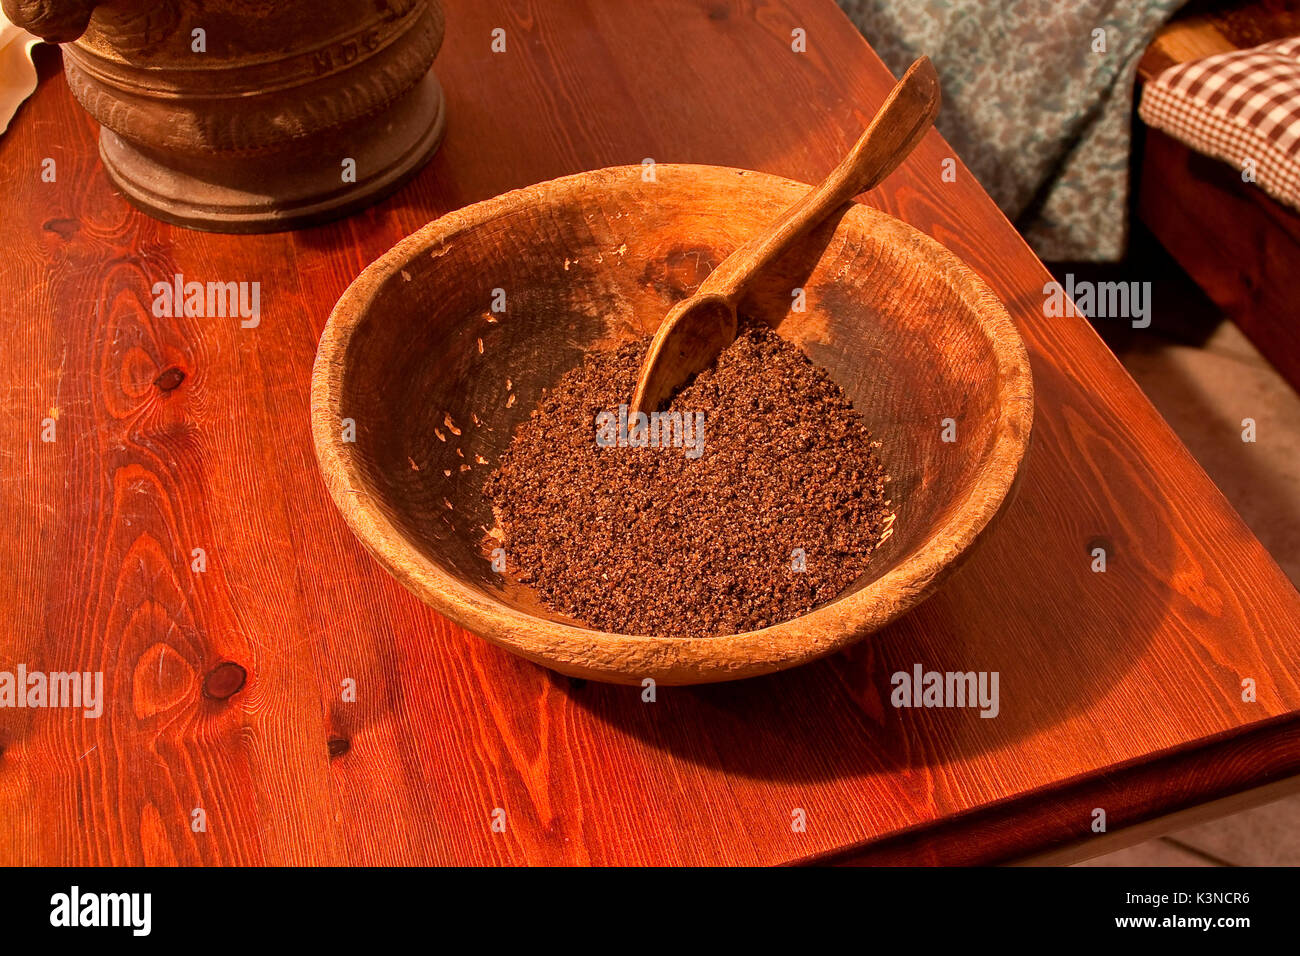 The pesteda spice, Valtellina typical dishes. Lombardy - Italy Stock Photo